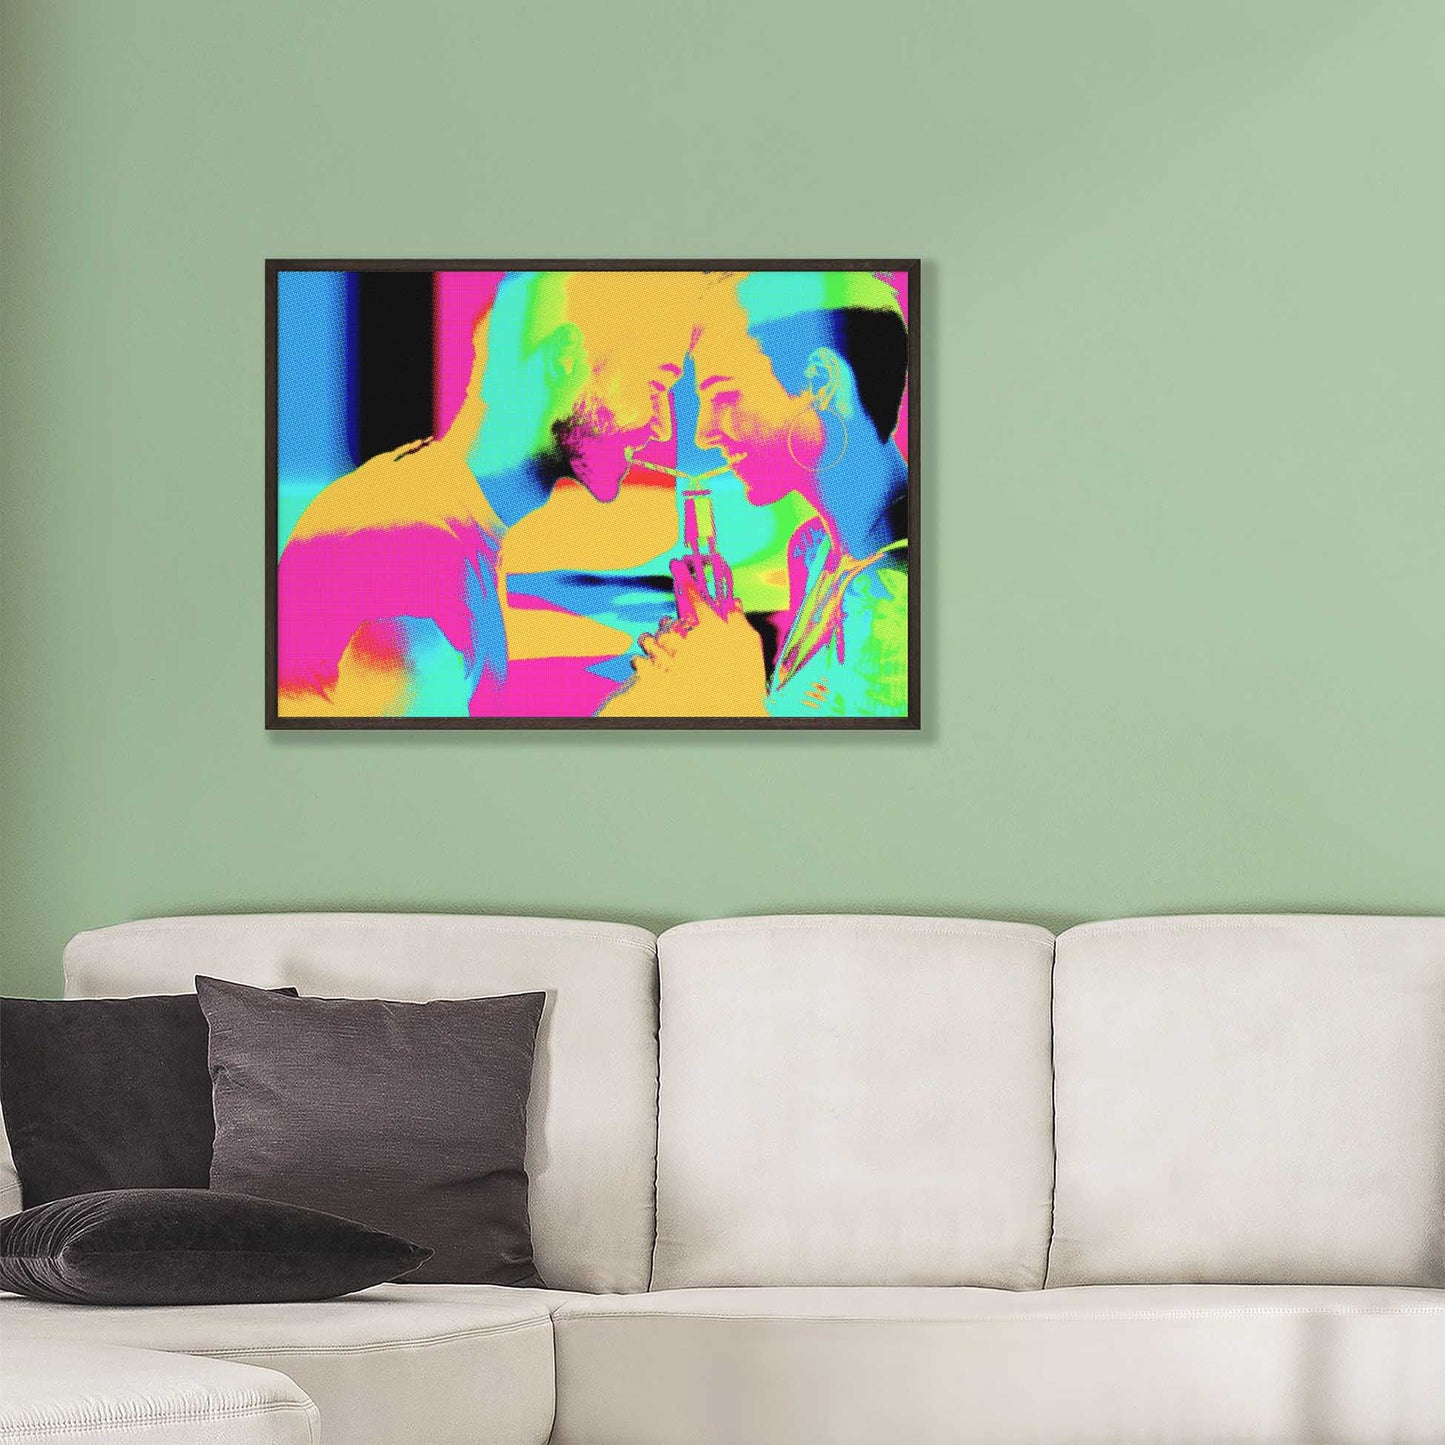 Experience the vibrant charm of our Personalised Pop Art Framed Print. Crafted through printing from photo, it features a captivating pop art style with a halftone effect. The bold and vibrant colors of pink, orange, green, and blue 